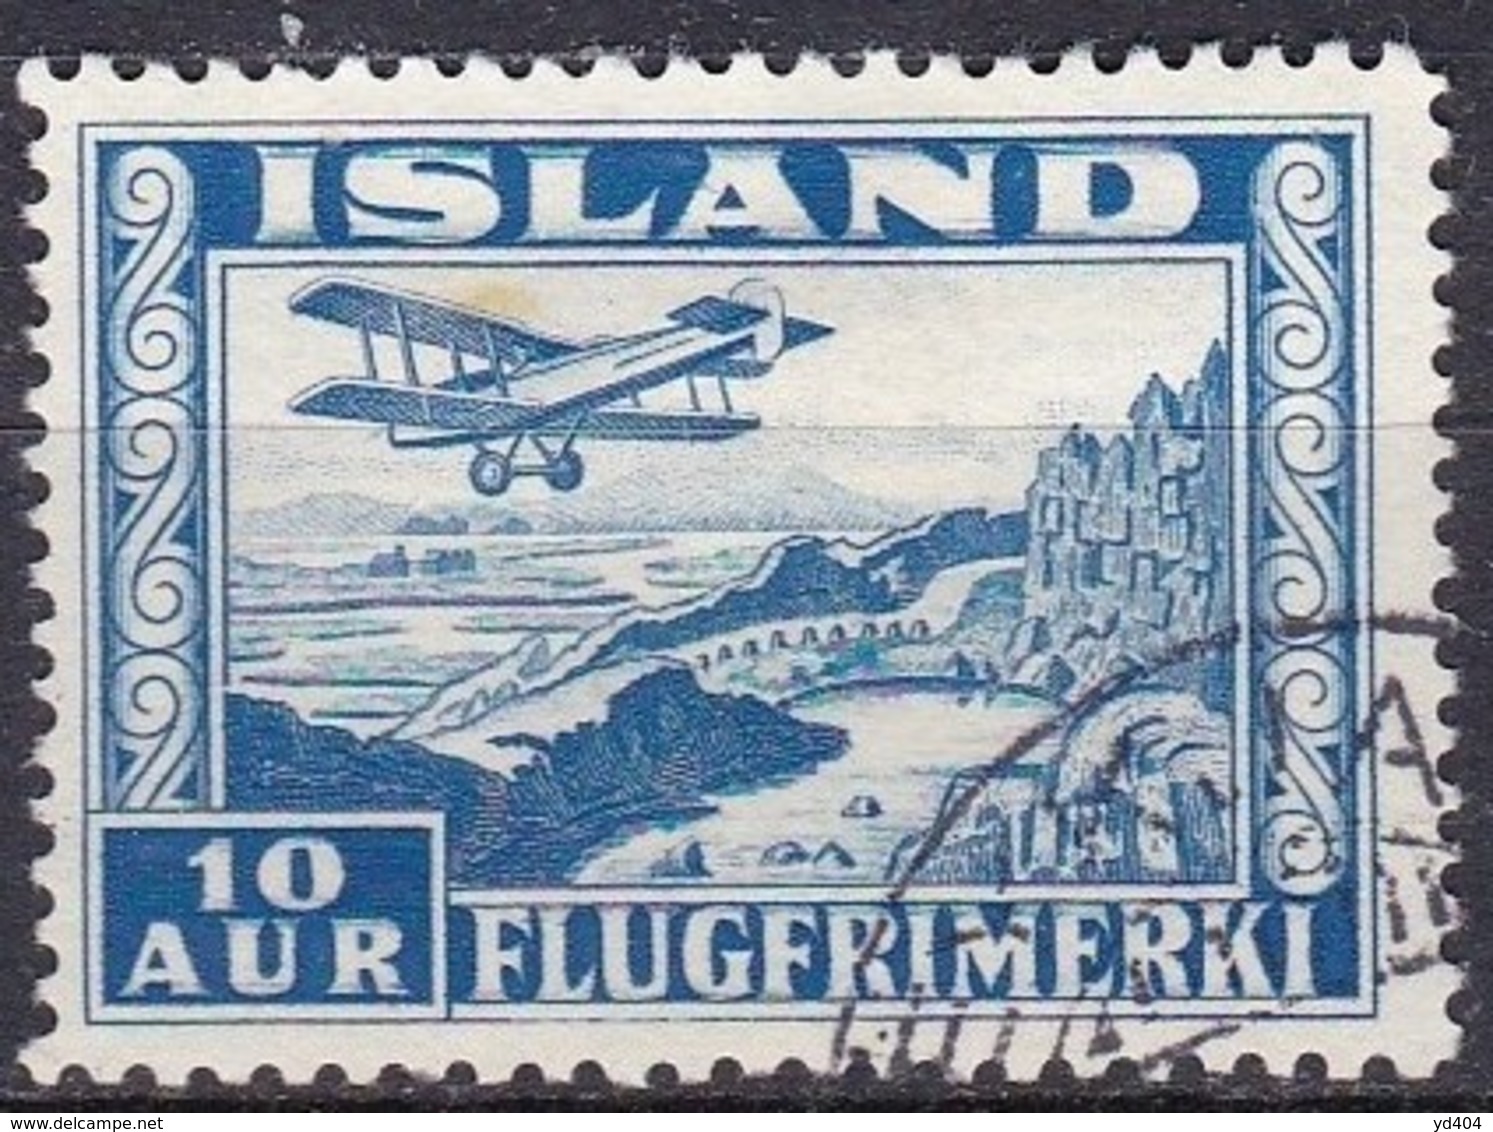 IS322 – ISLANDE – ICELAND – 1934 – PLANE OVER THINGVALLA – SC # C15 USED - Poste Aérienne